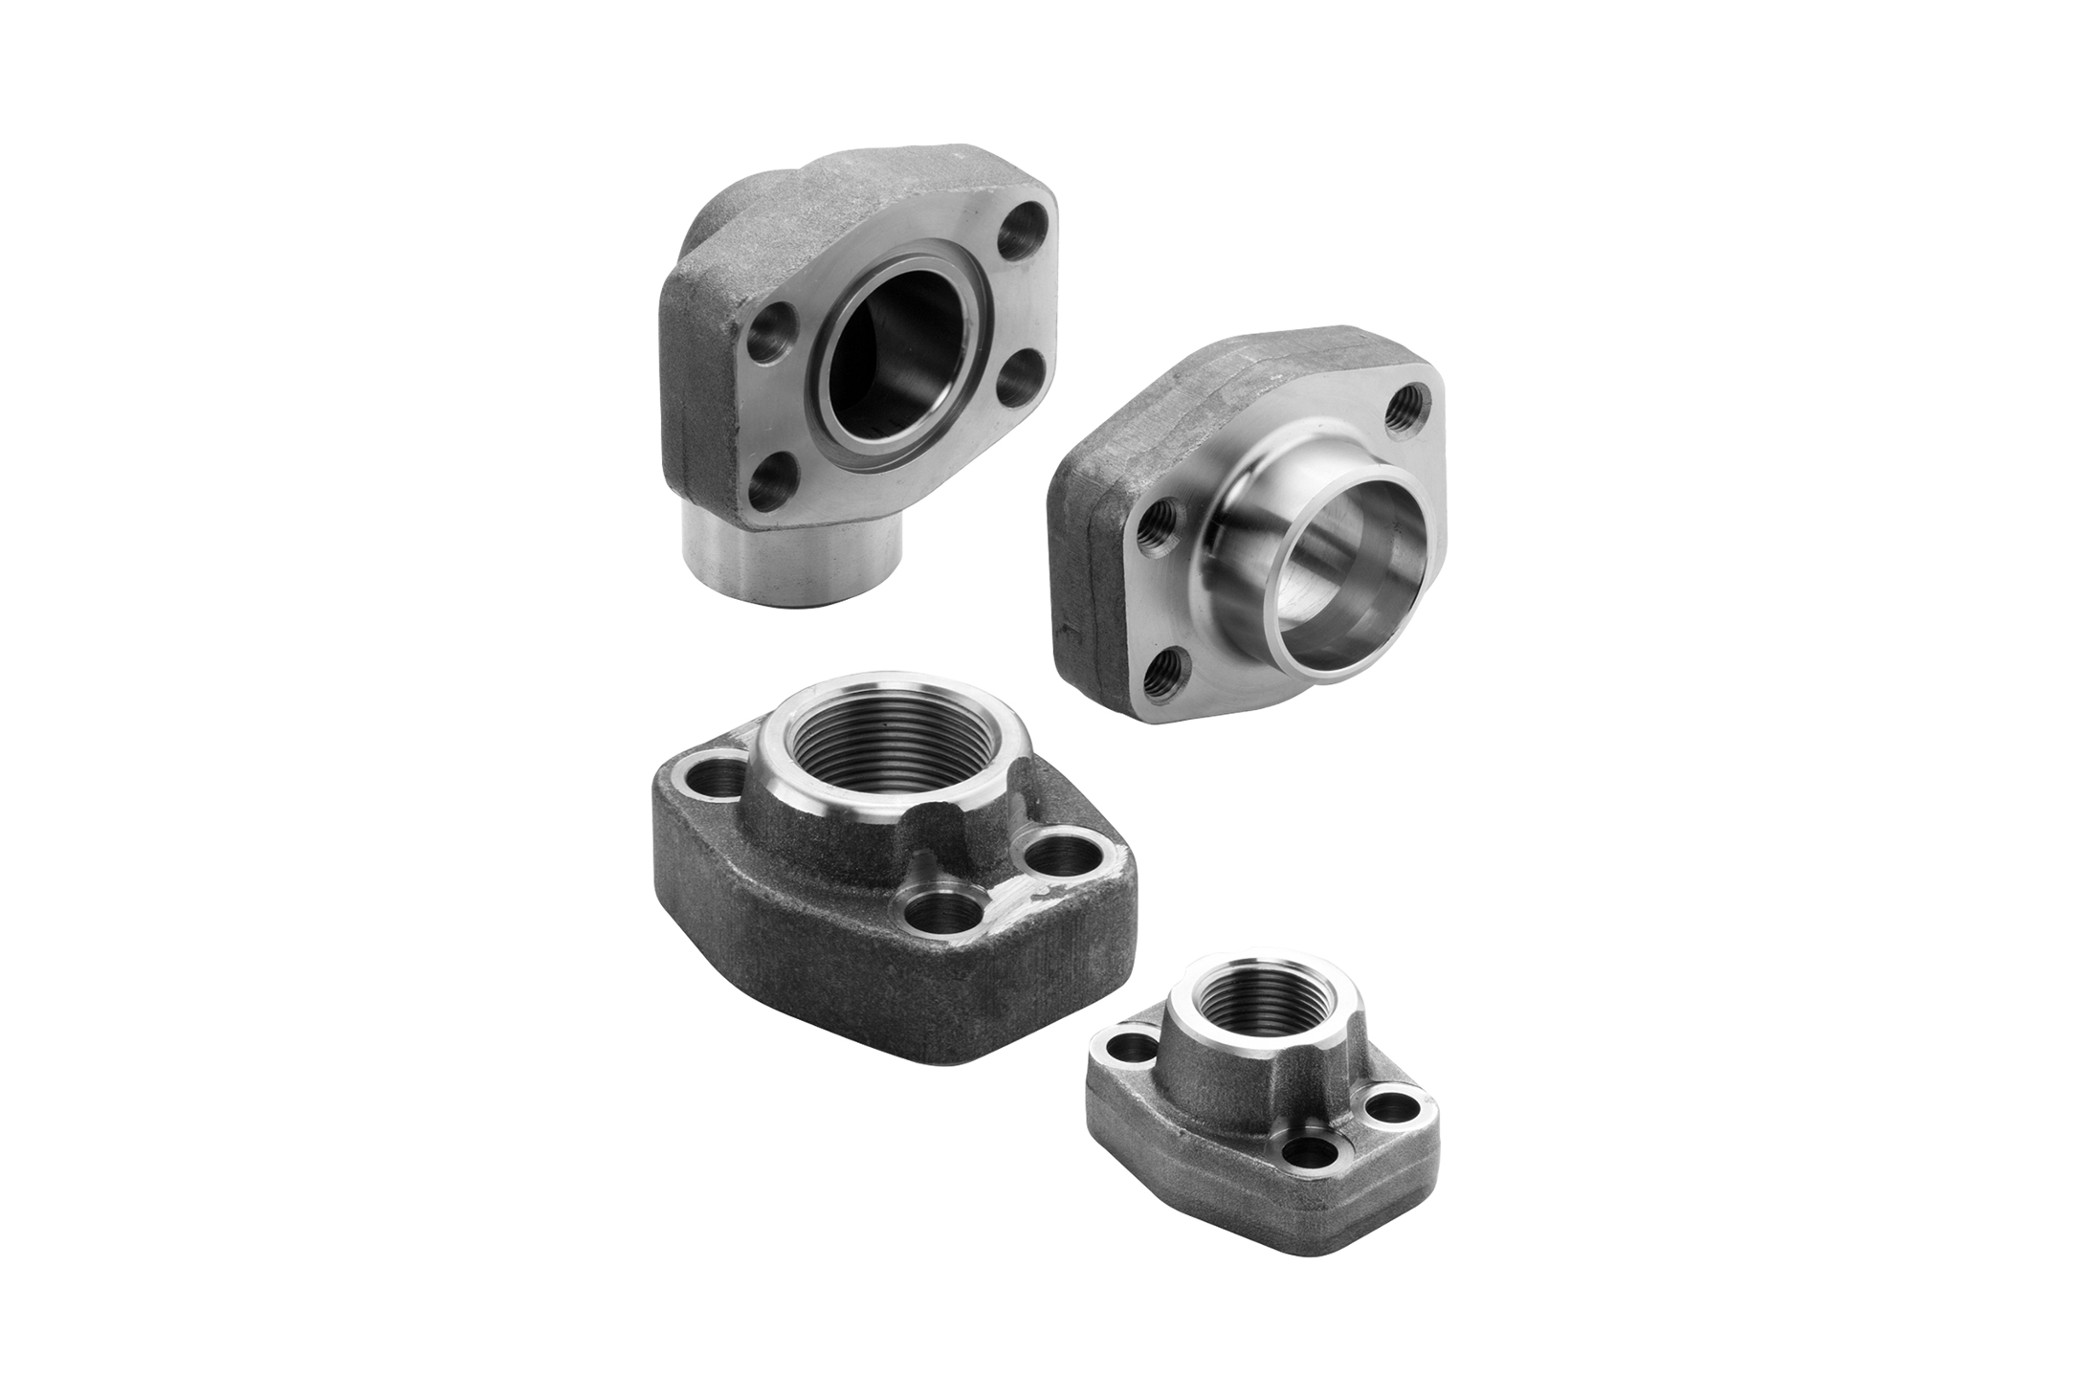 SAE Single-Part Flanges from STAUFF